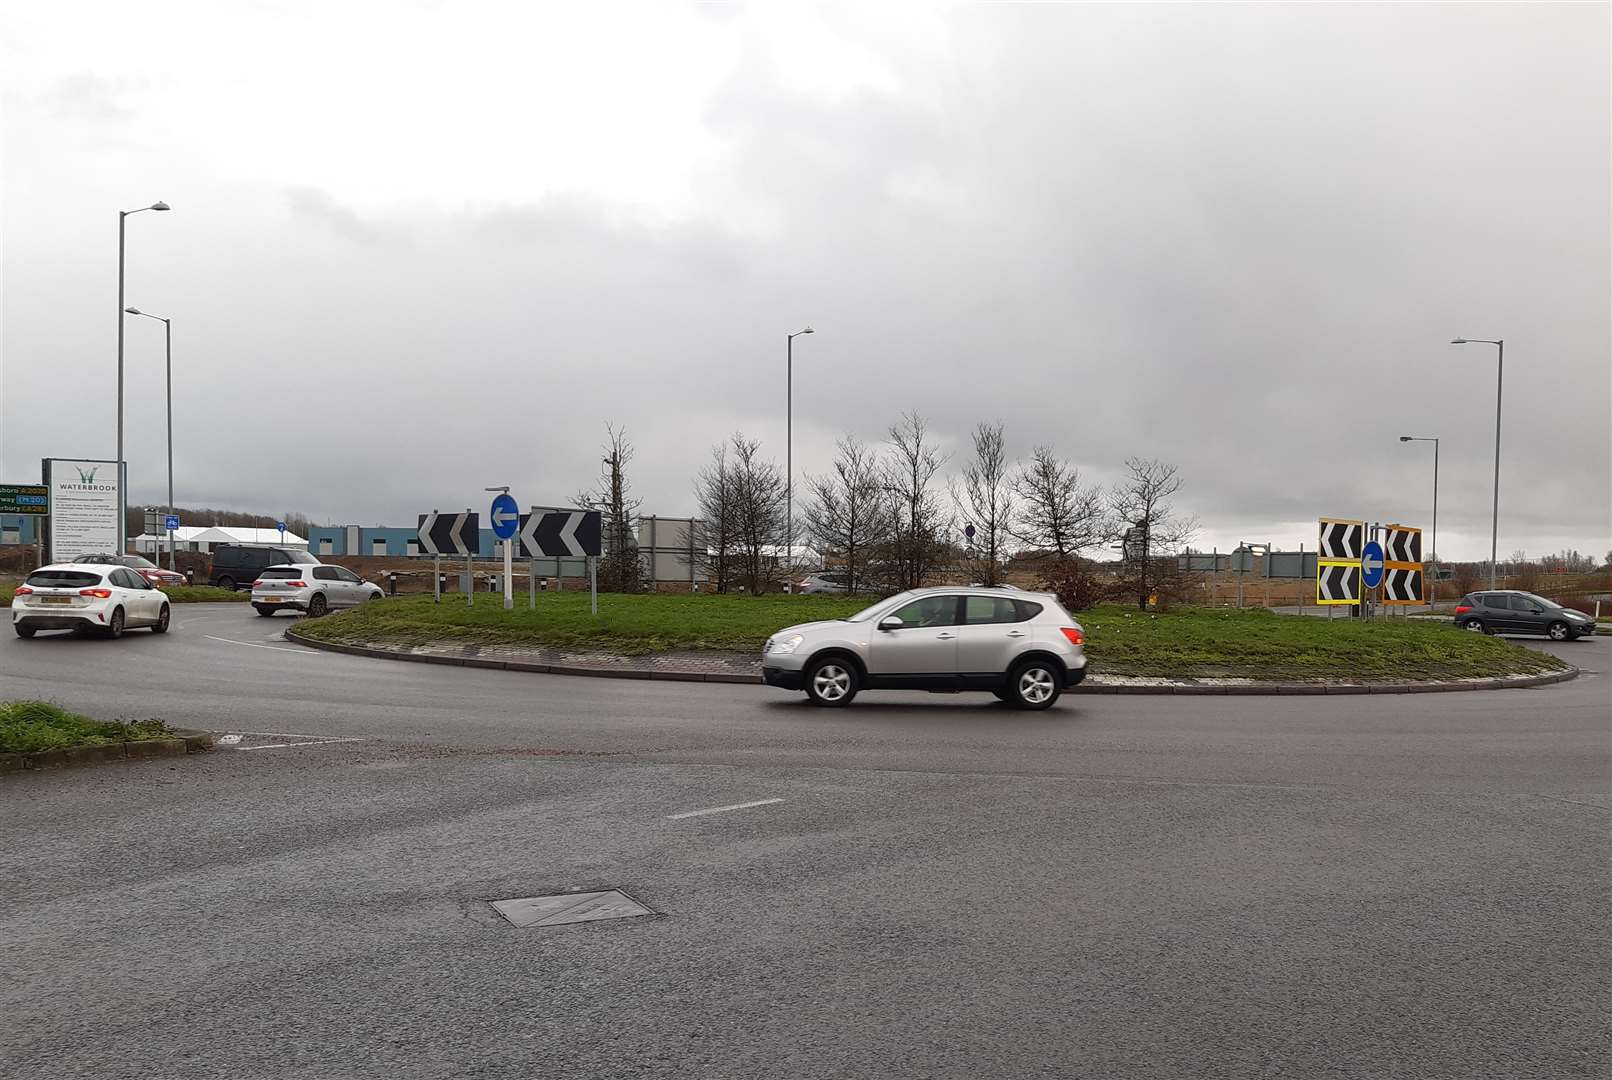 A signalised junction will replace the roundabout, with contractors set to start work later this month